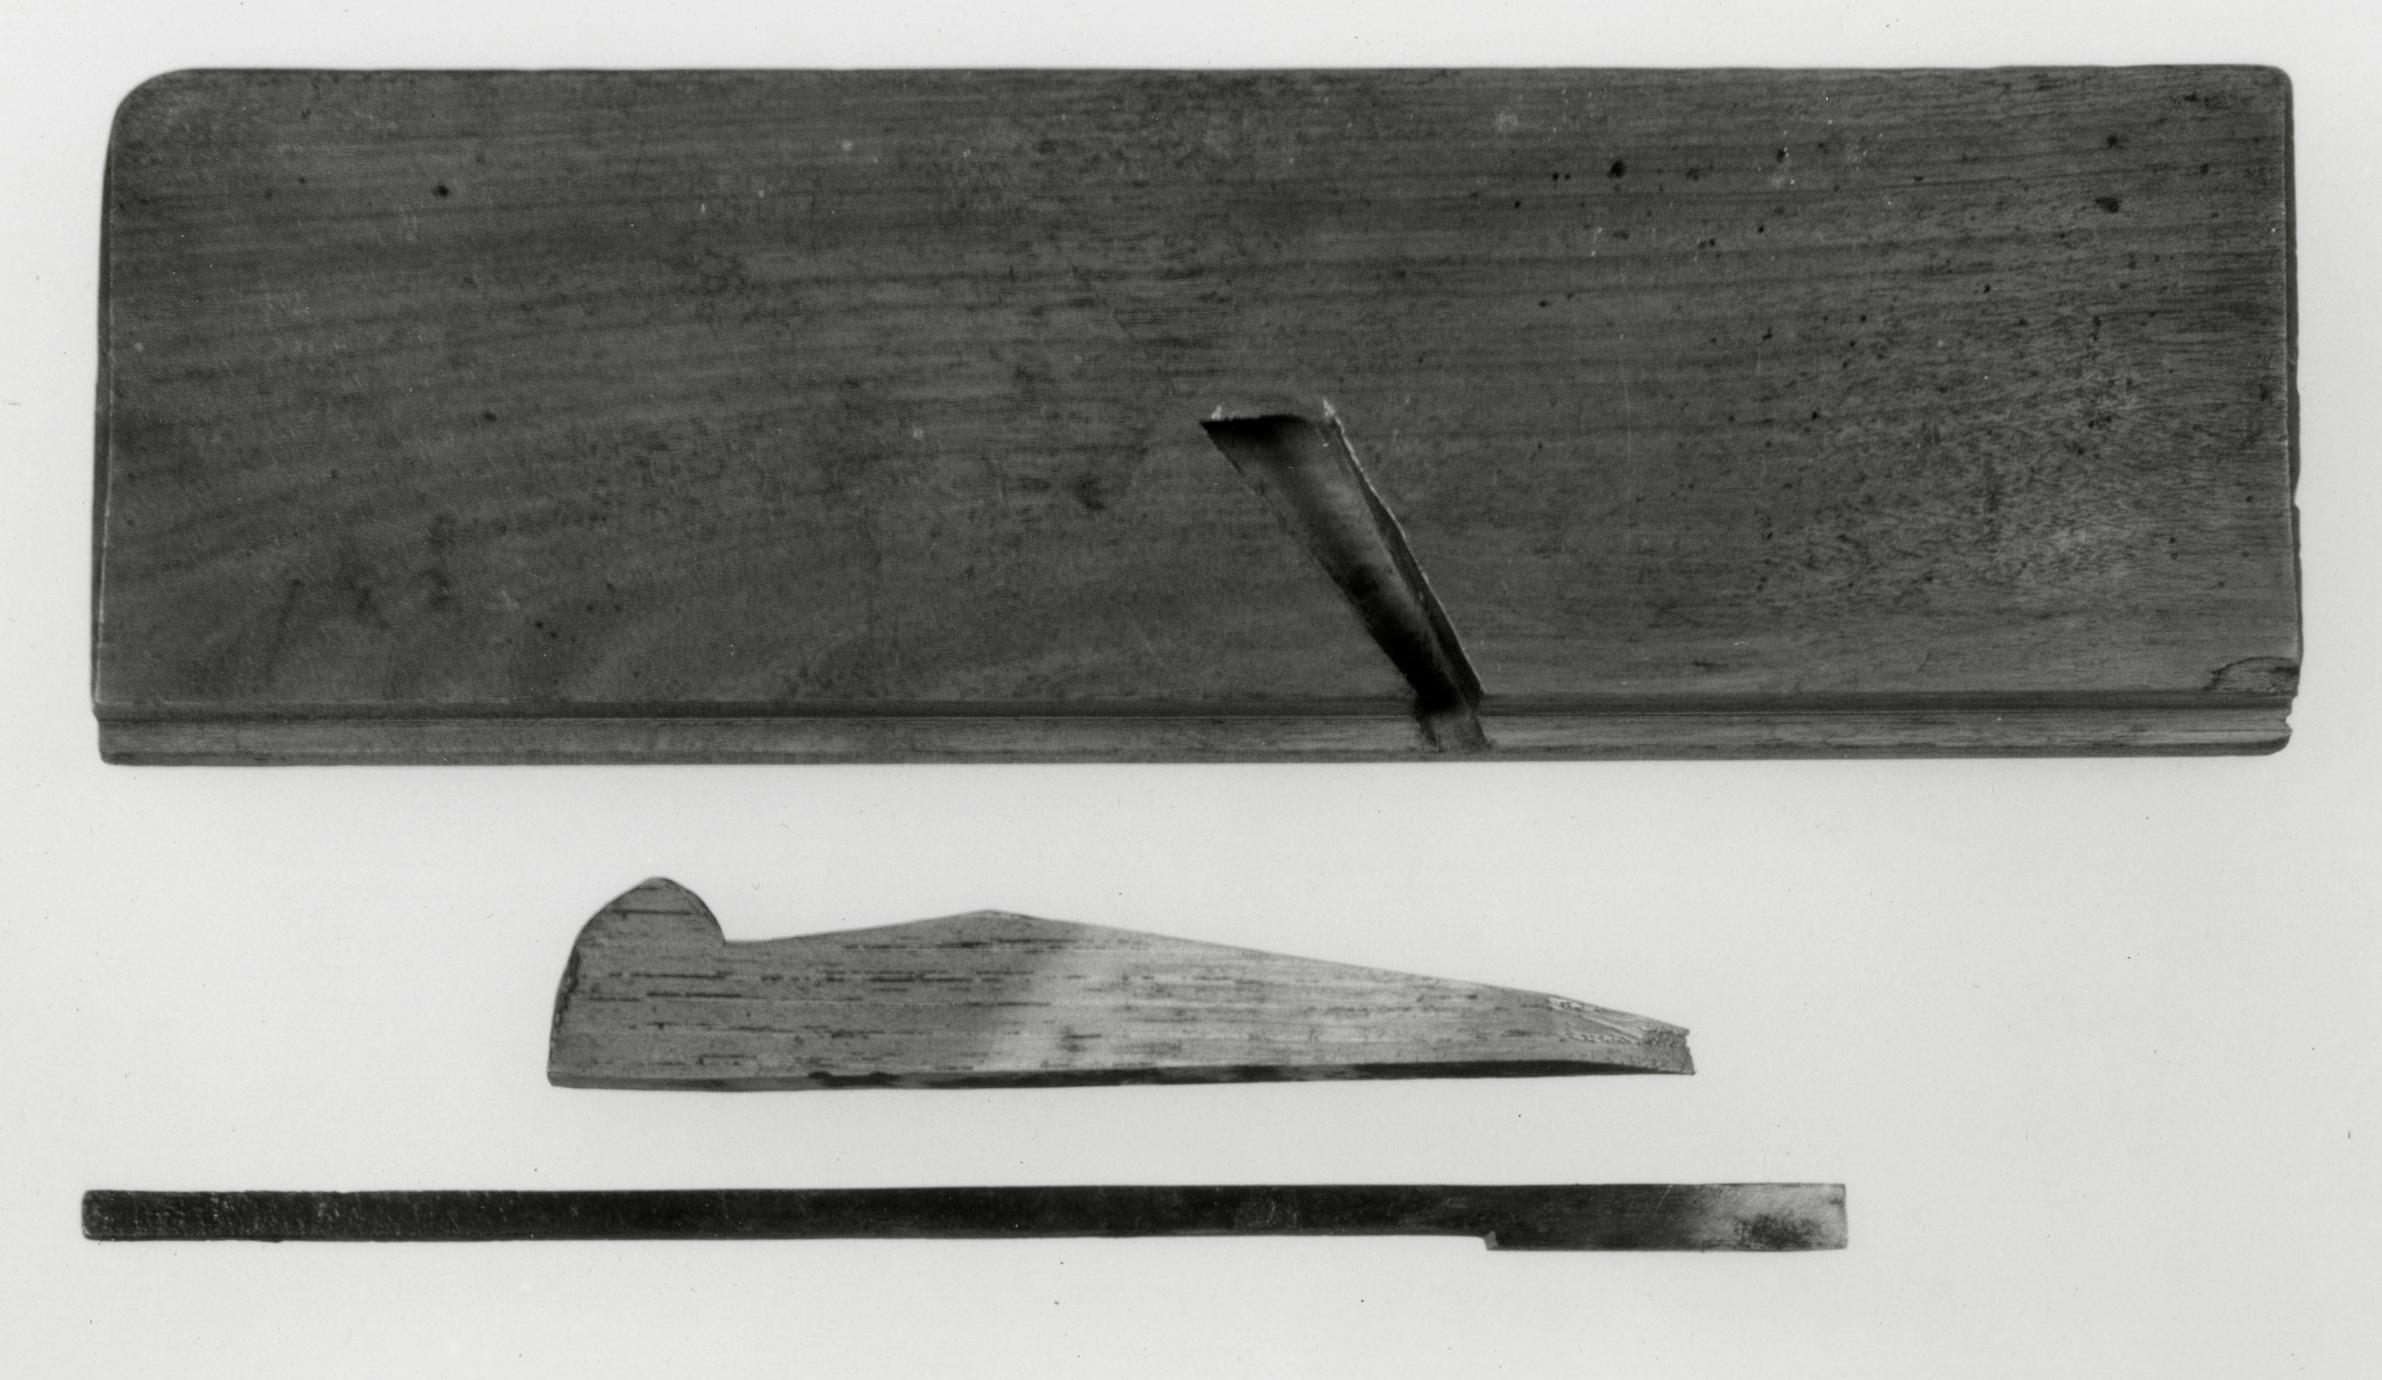 Black and white photograph of a rabbet plane.